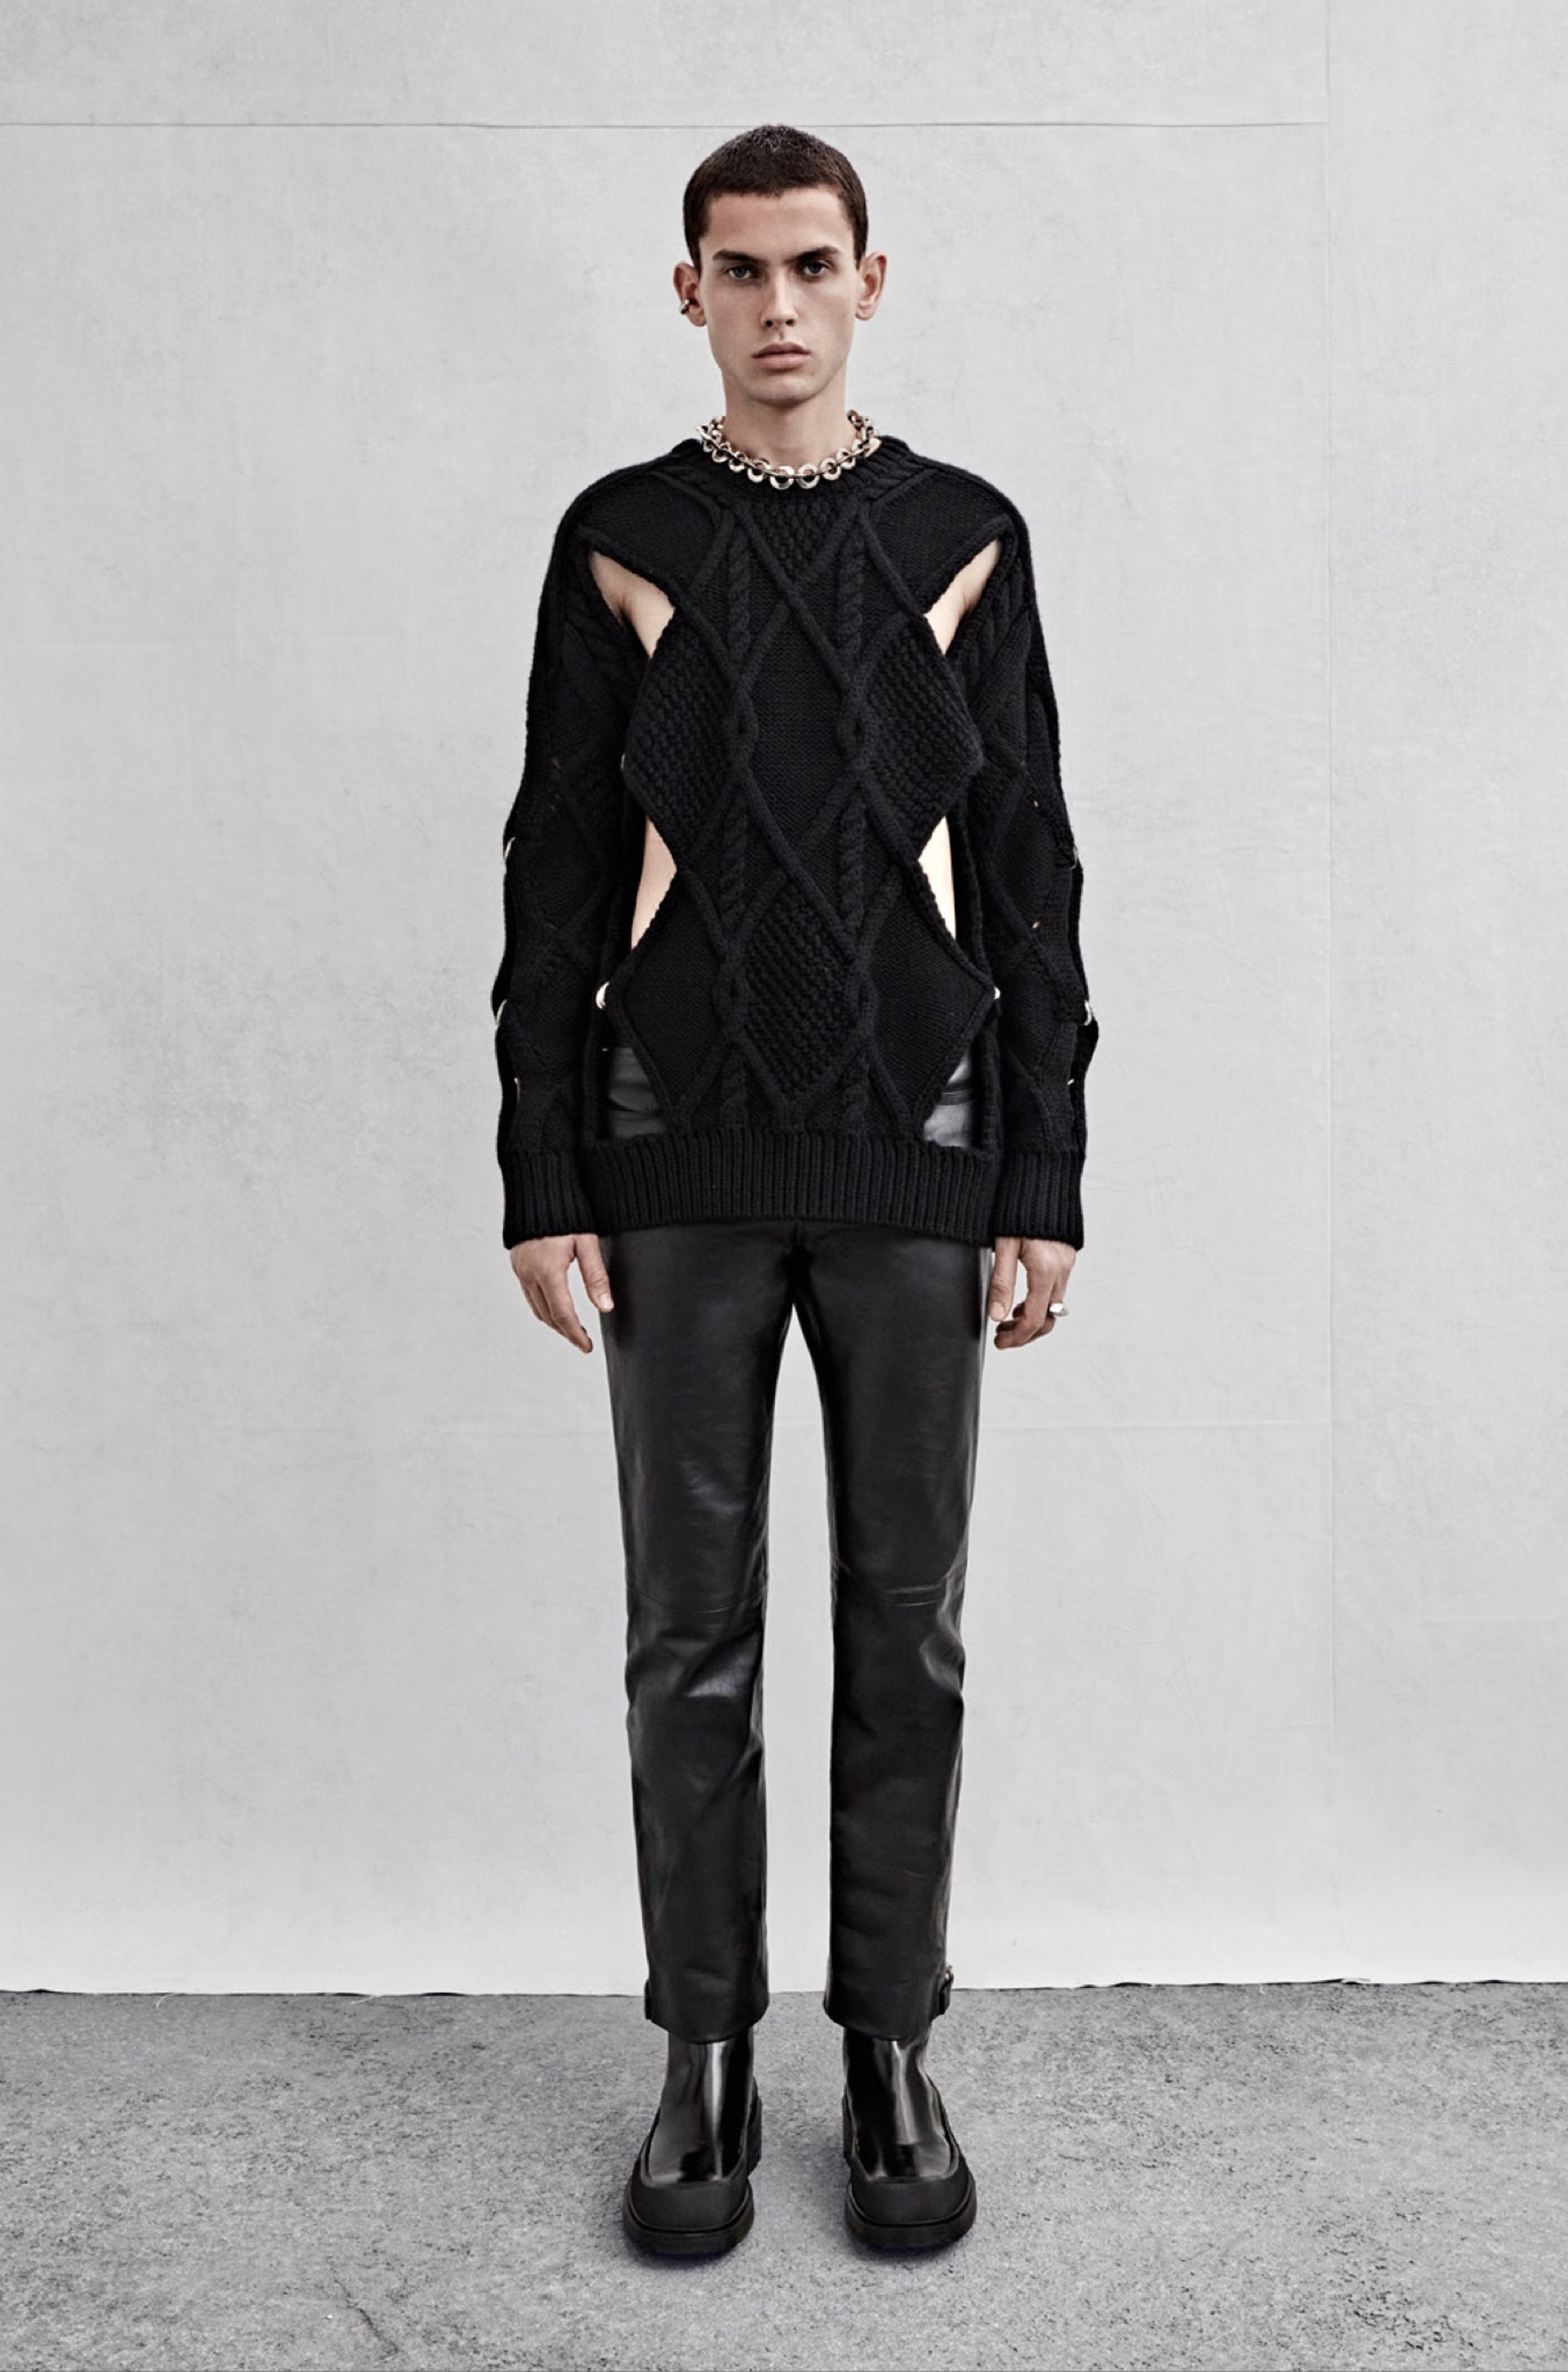 A crew neck jumper in chunky cable knit black wool with silver ring detailing and trousers in black leather with zipped hem detailing.